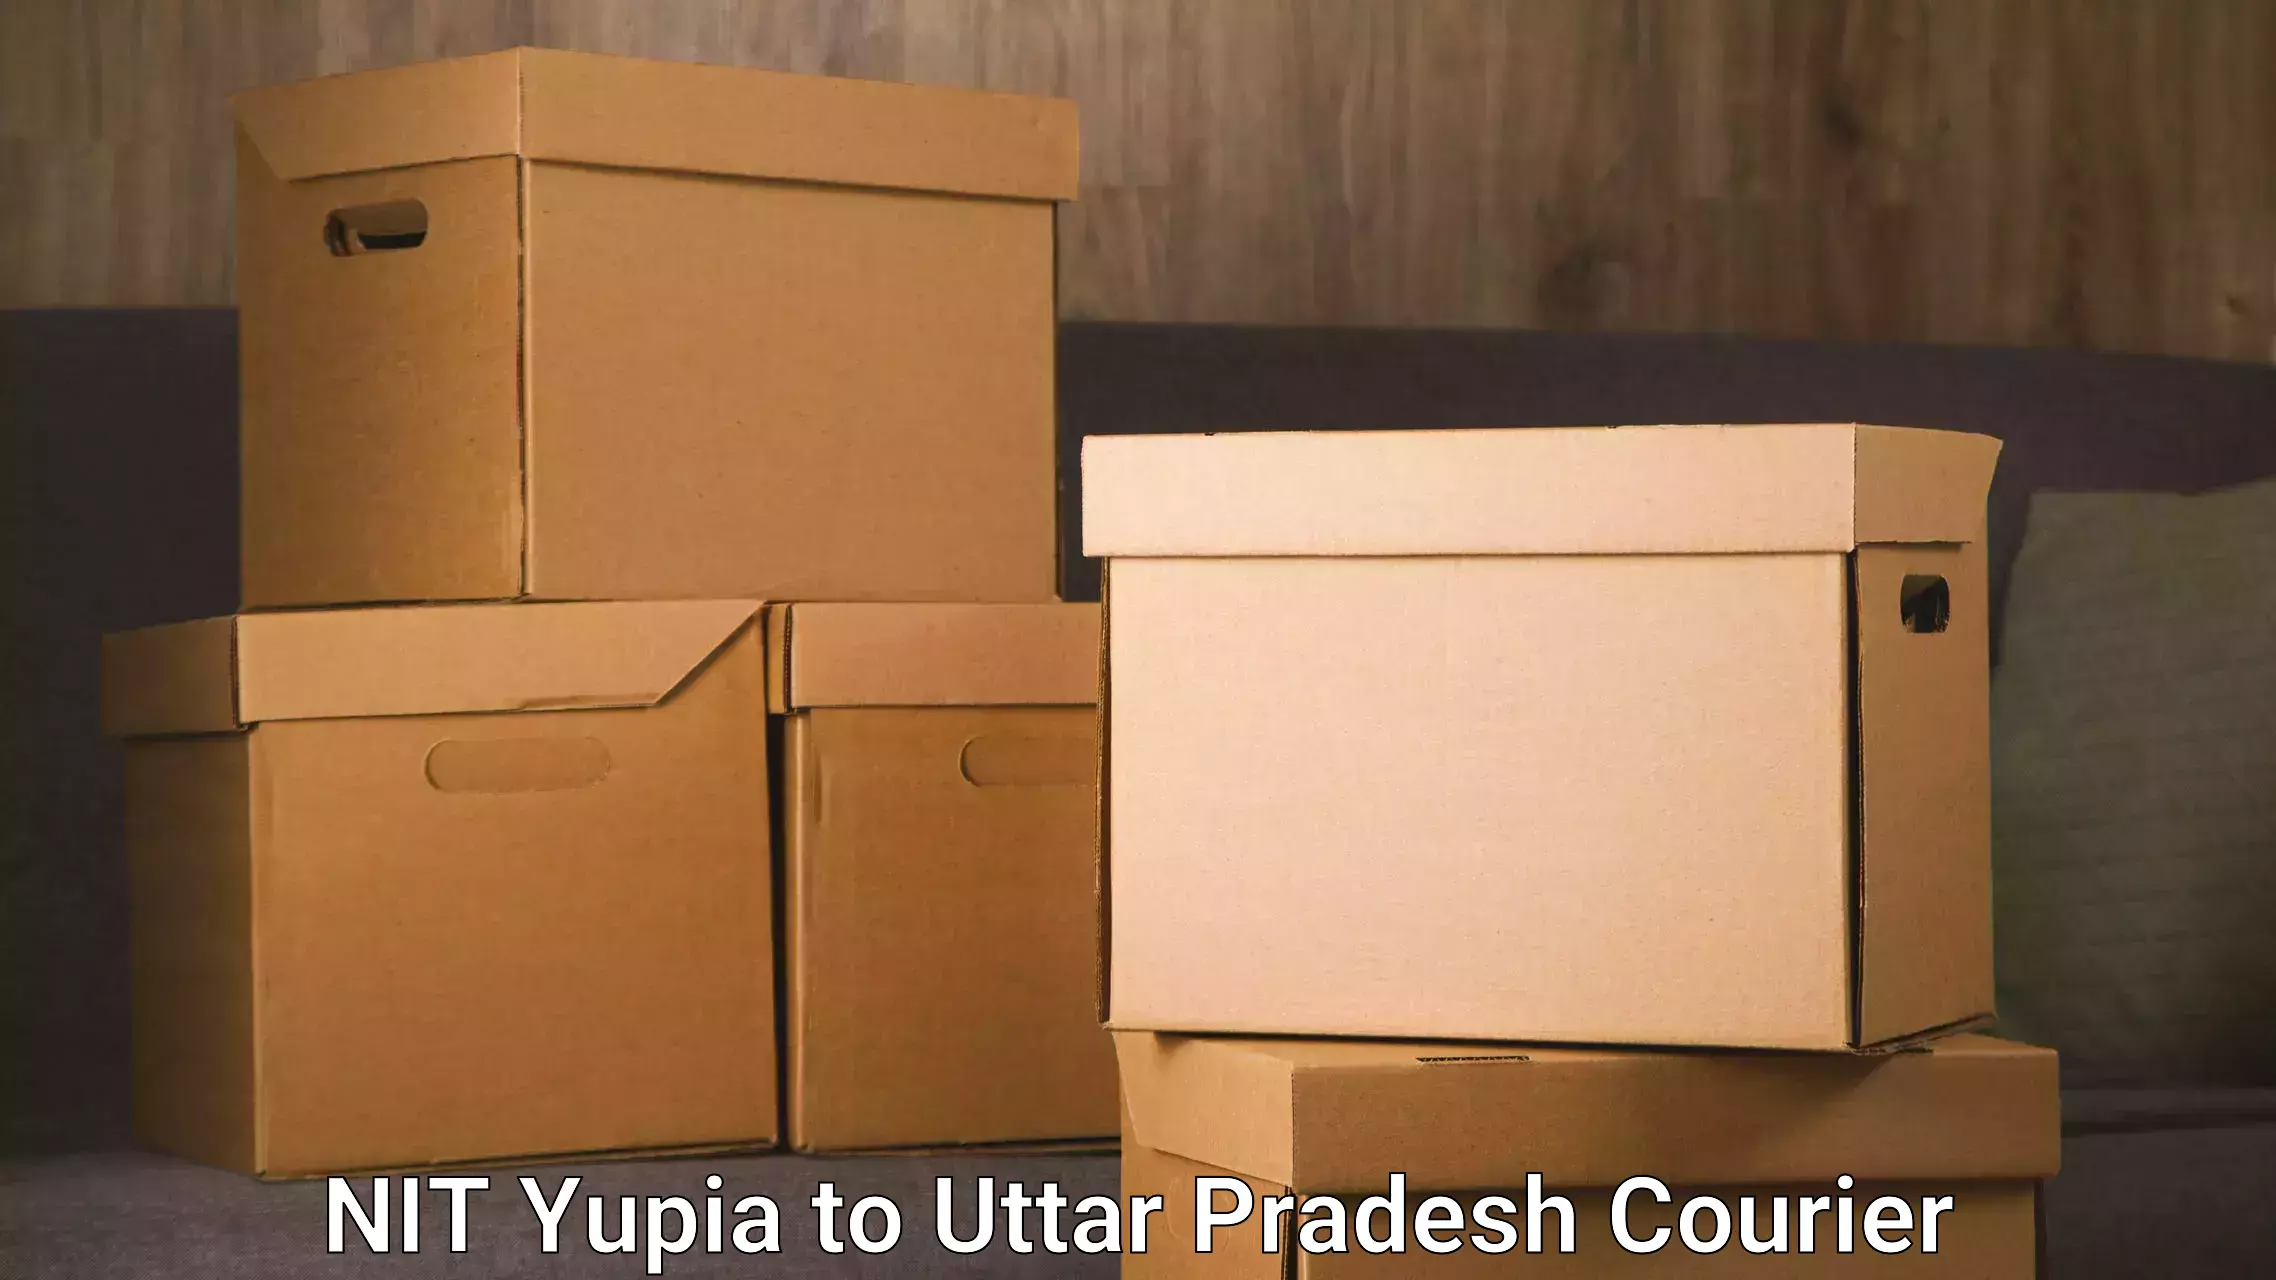 State-of-the-art courier technology NIT Yupia to Varanasi